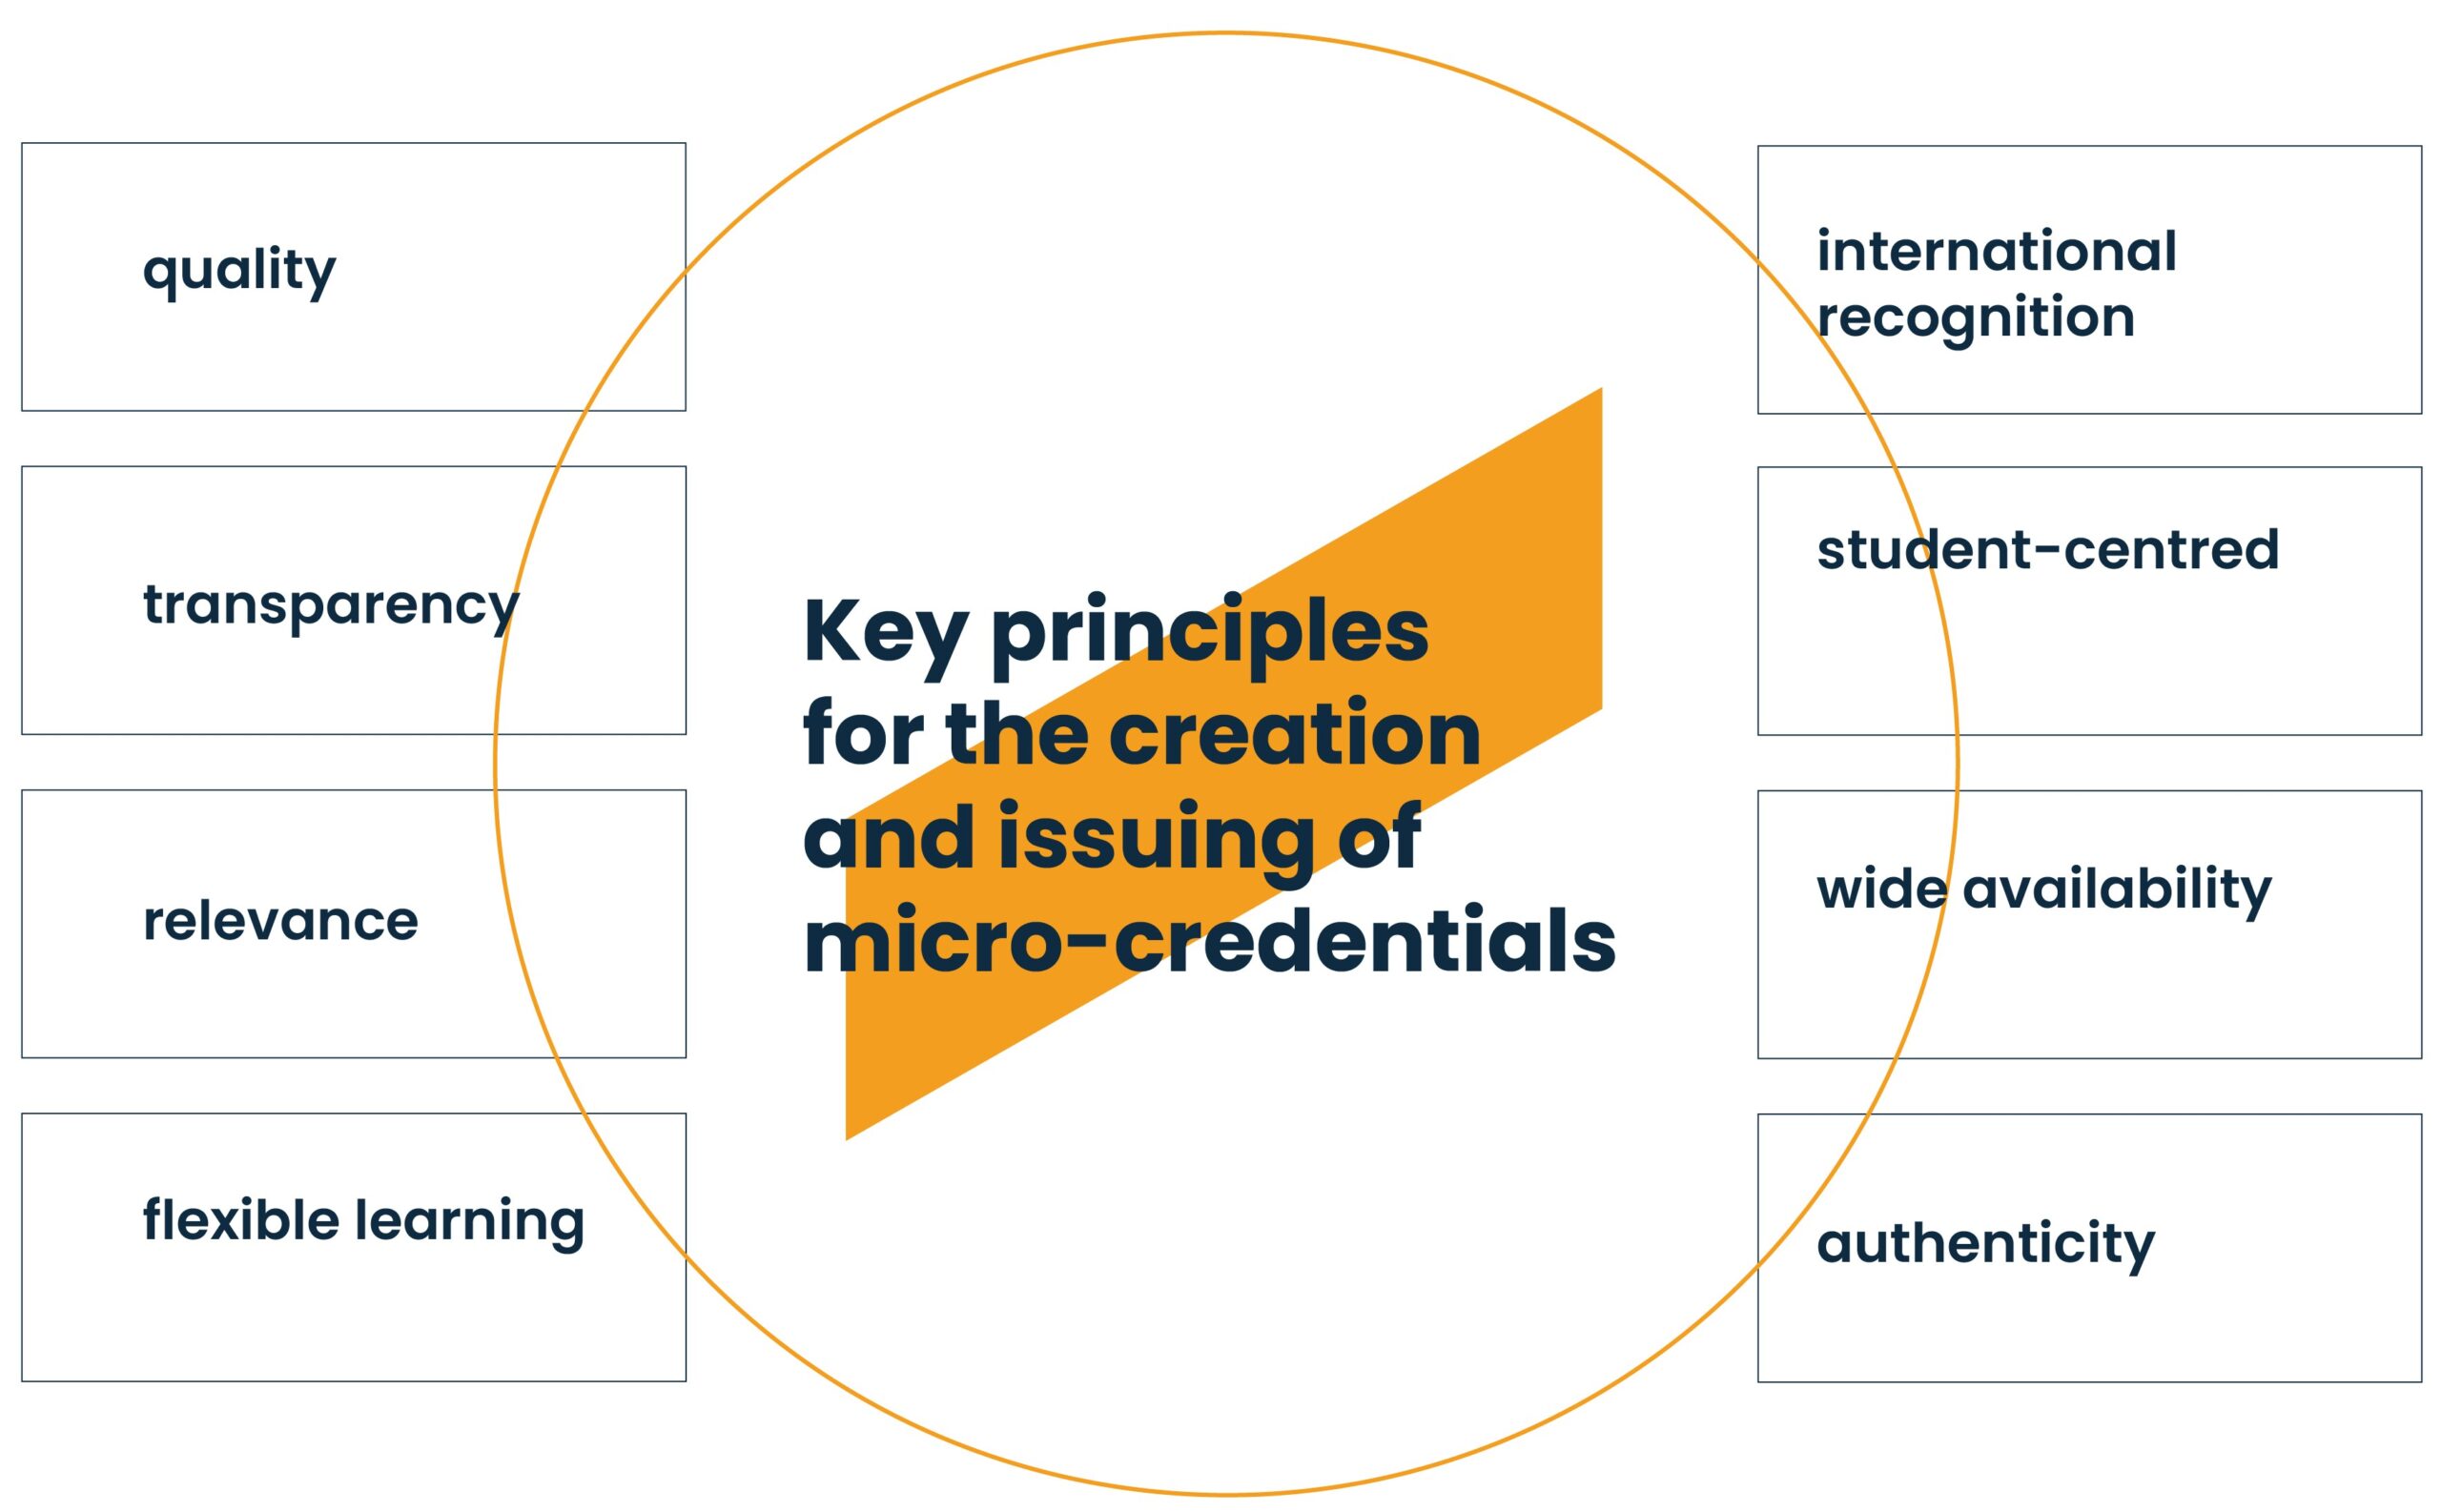 Key principles for the creation and issuing of micro-credentials • quality • transparency • relevance • flexible learning • international recognition • student-centred • wide availability • authenticity